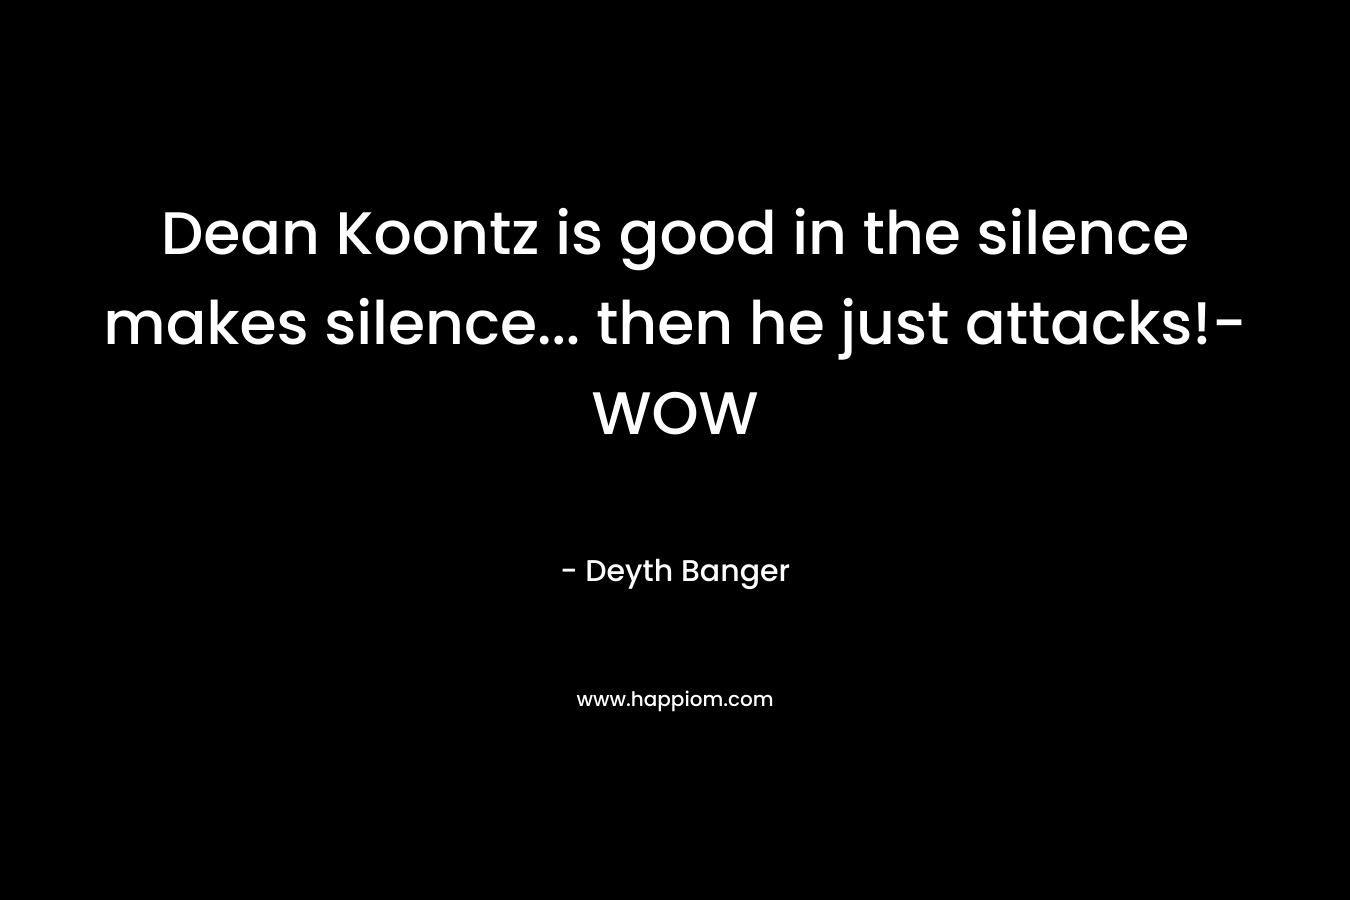 Dean Koontz is good in the silence makes silence… then he just attacks!- WOW – Deyth Banger